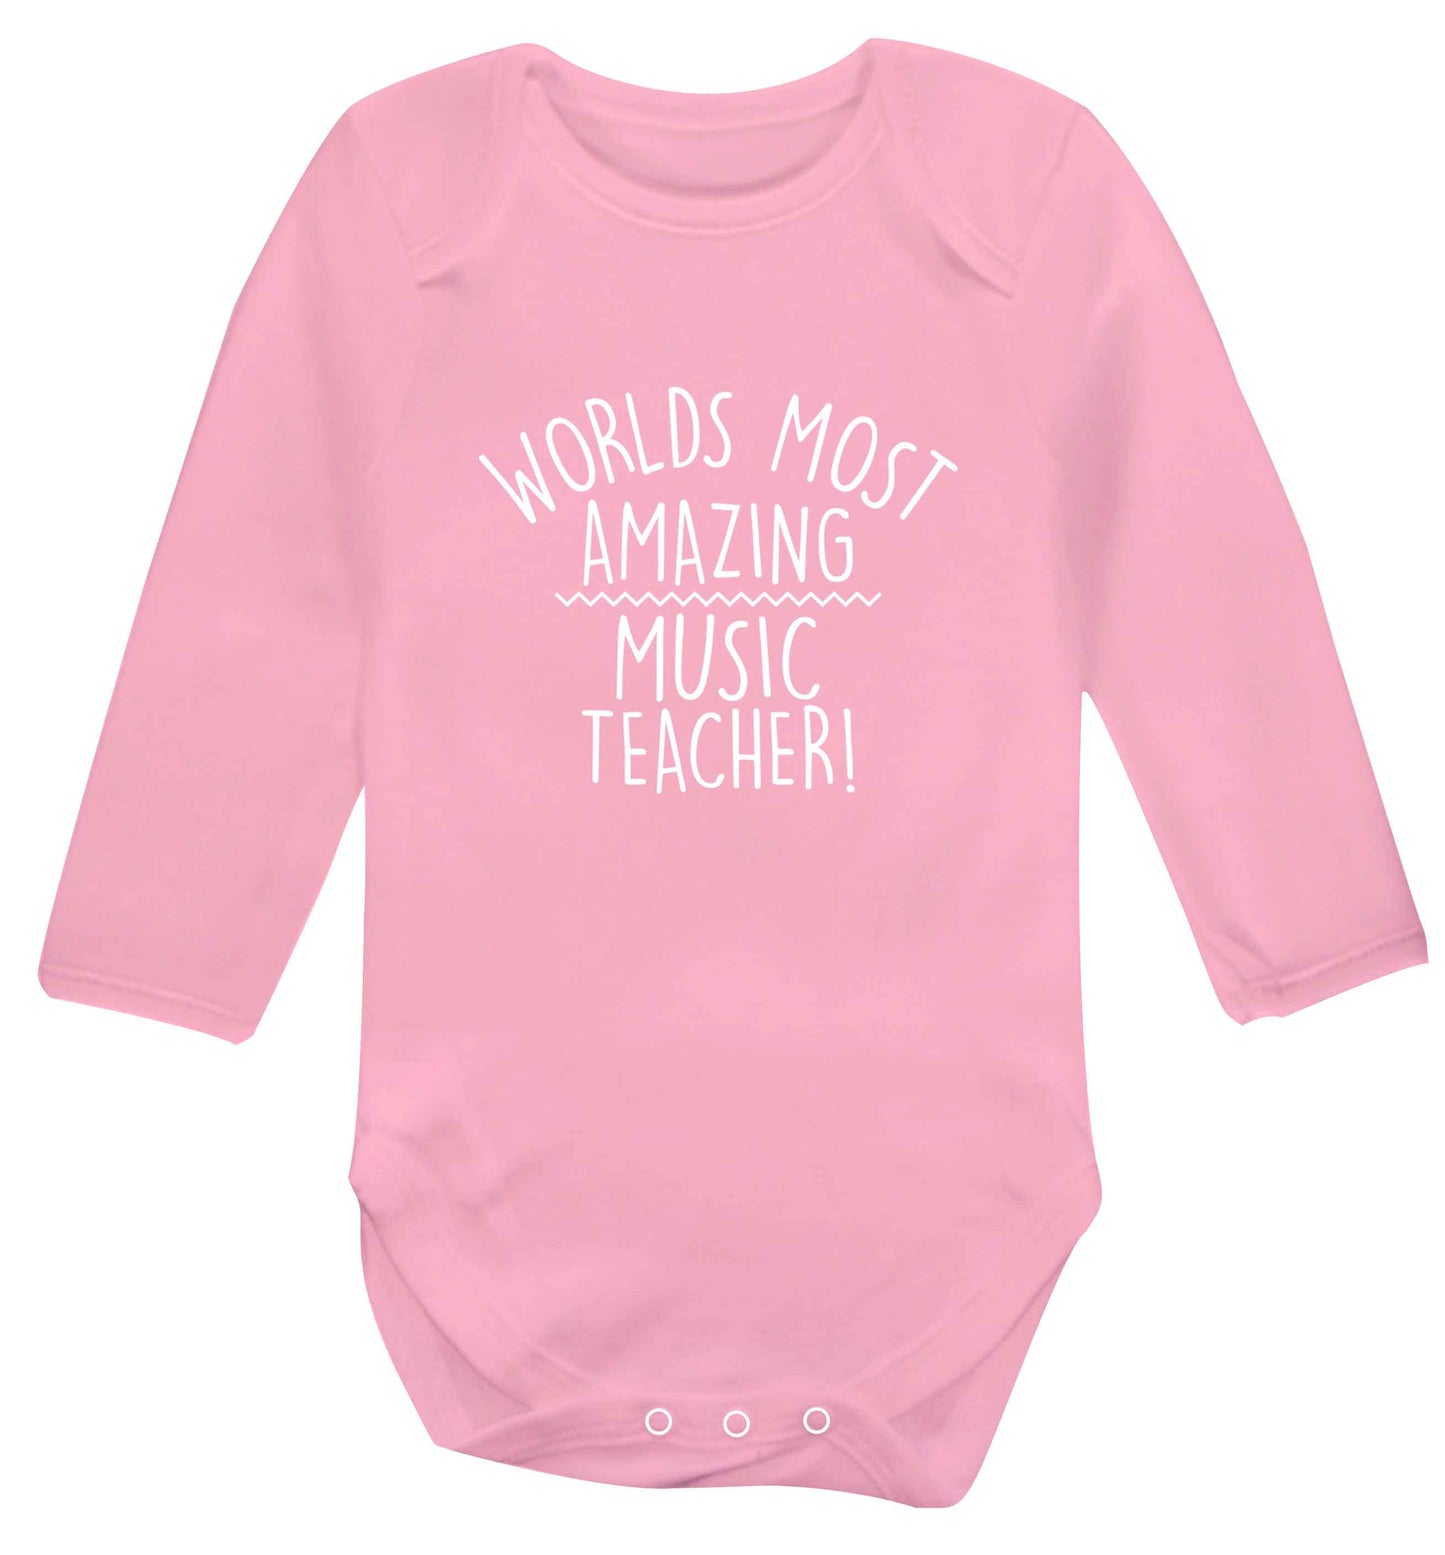 Worlds most amazing music teacher baby vest long sleeved pale pink 6-12 months